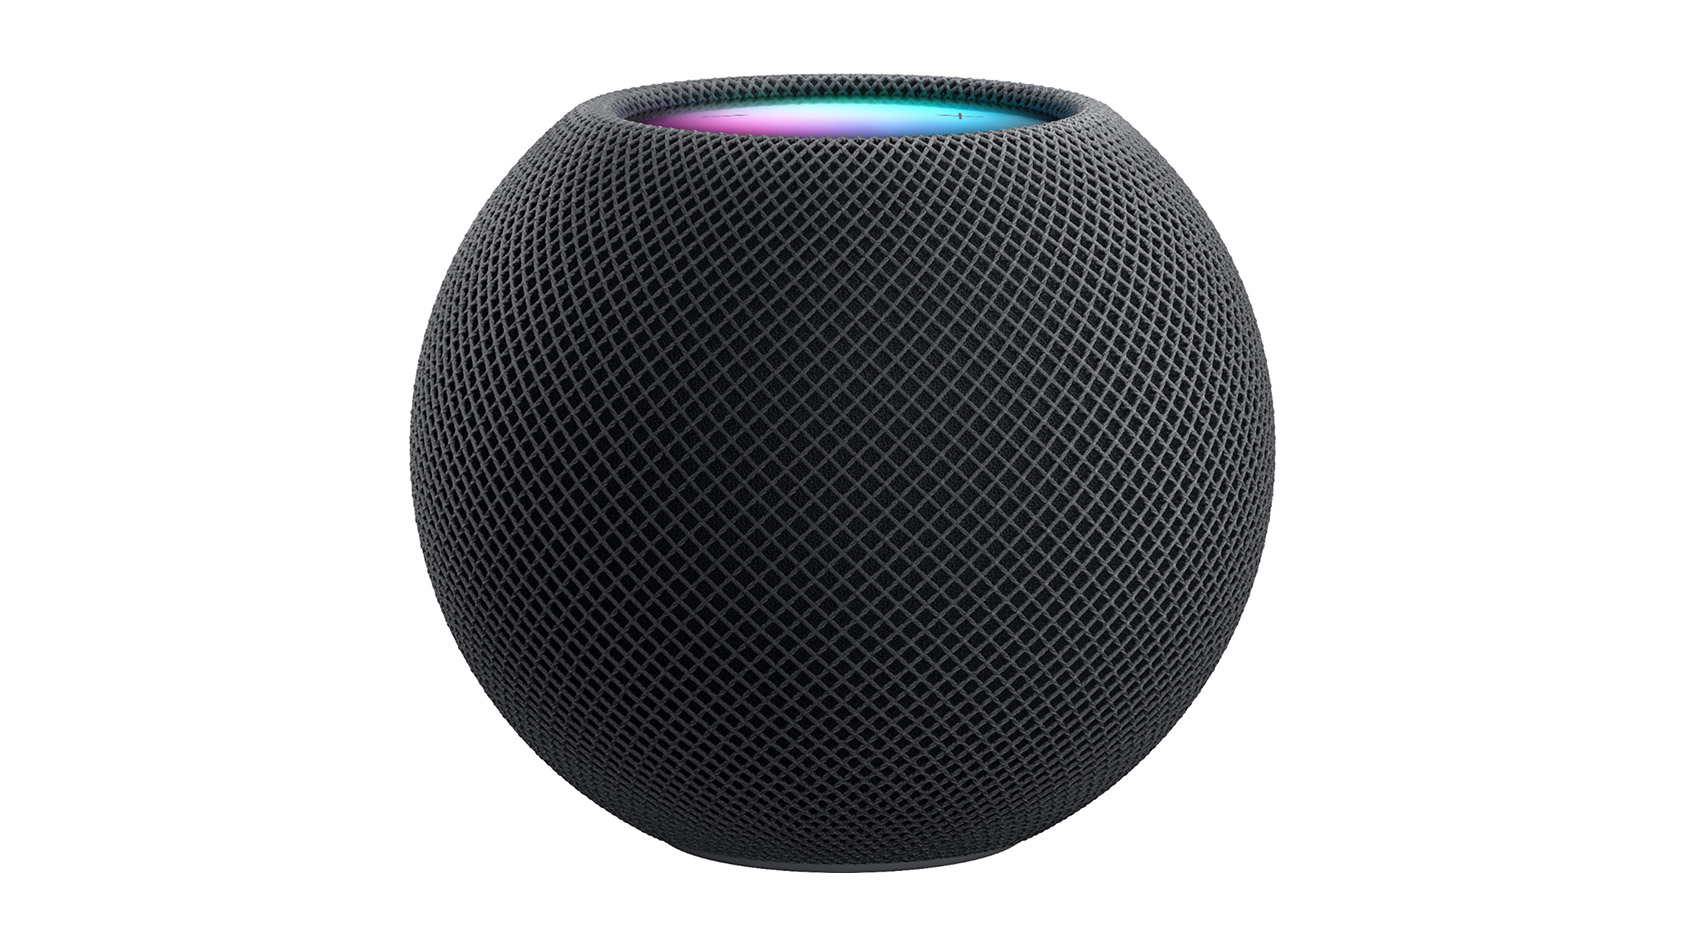 The Apple HomePod mini in black against a white background.